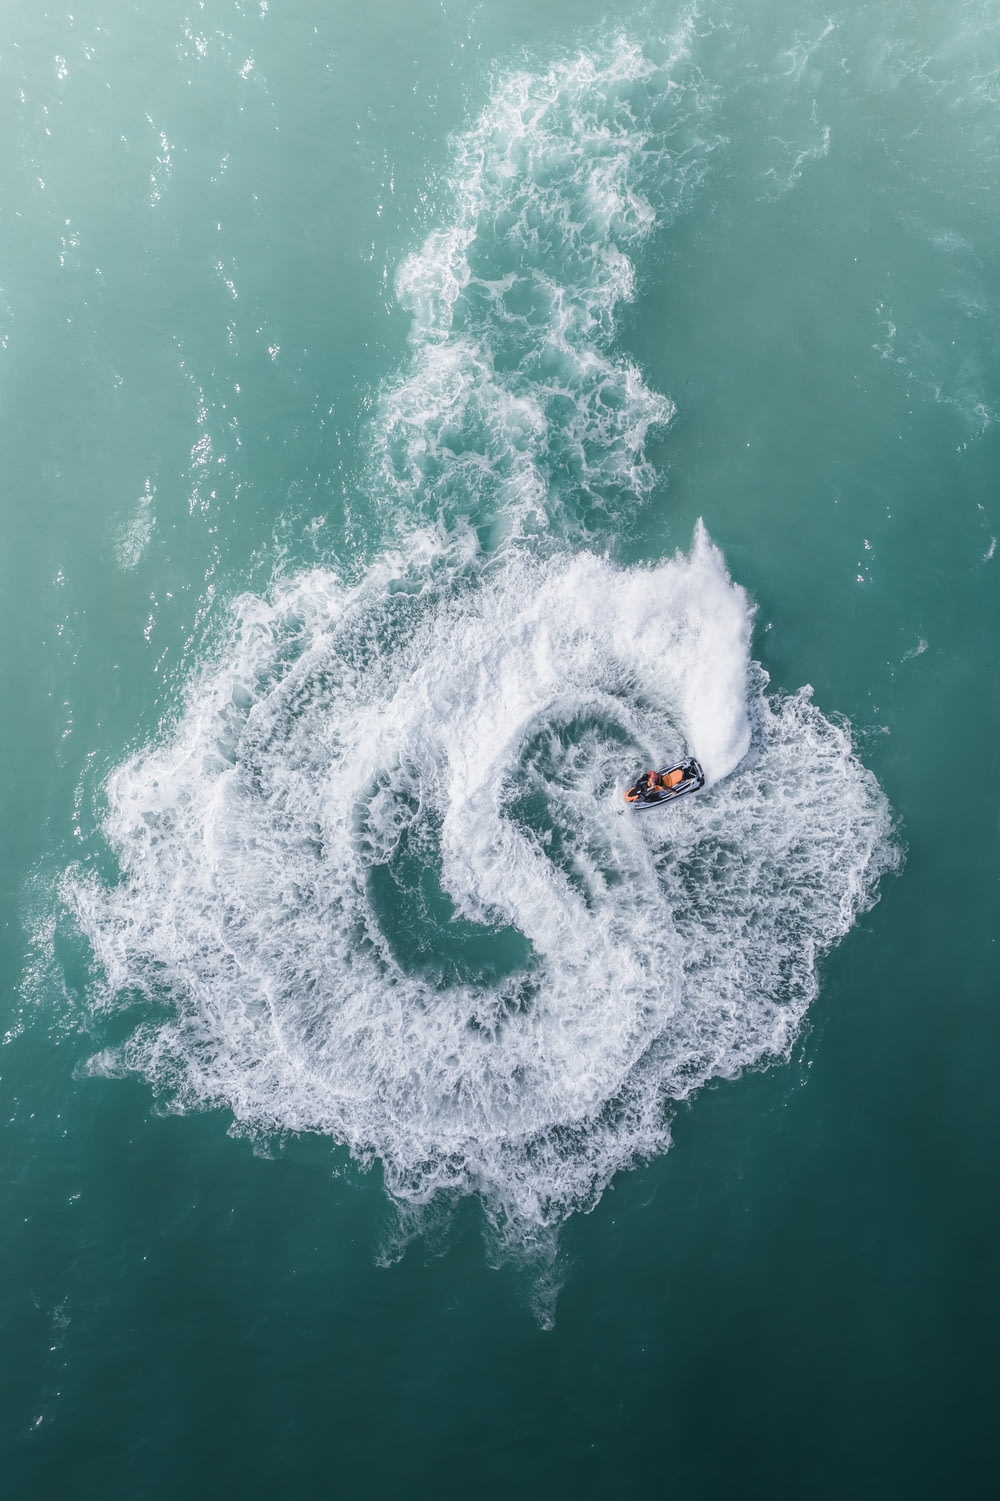 a person on a surfboard riding a wave in the ocean